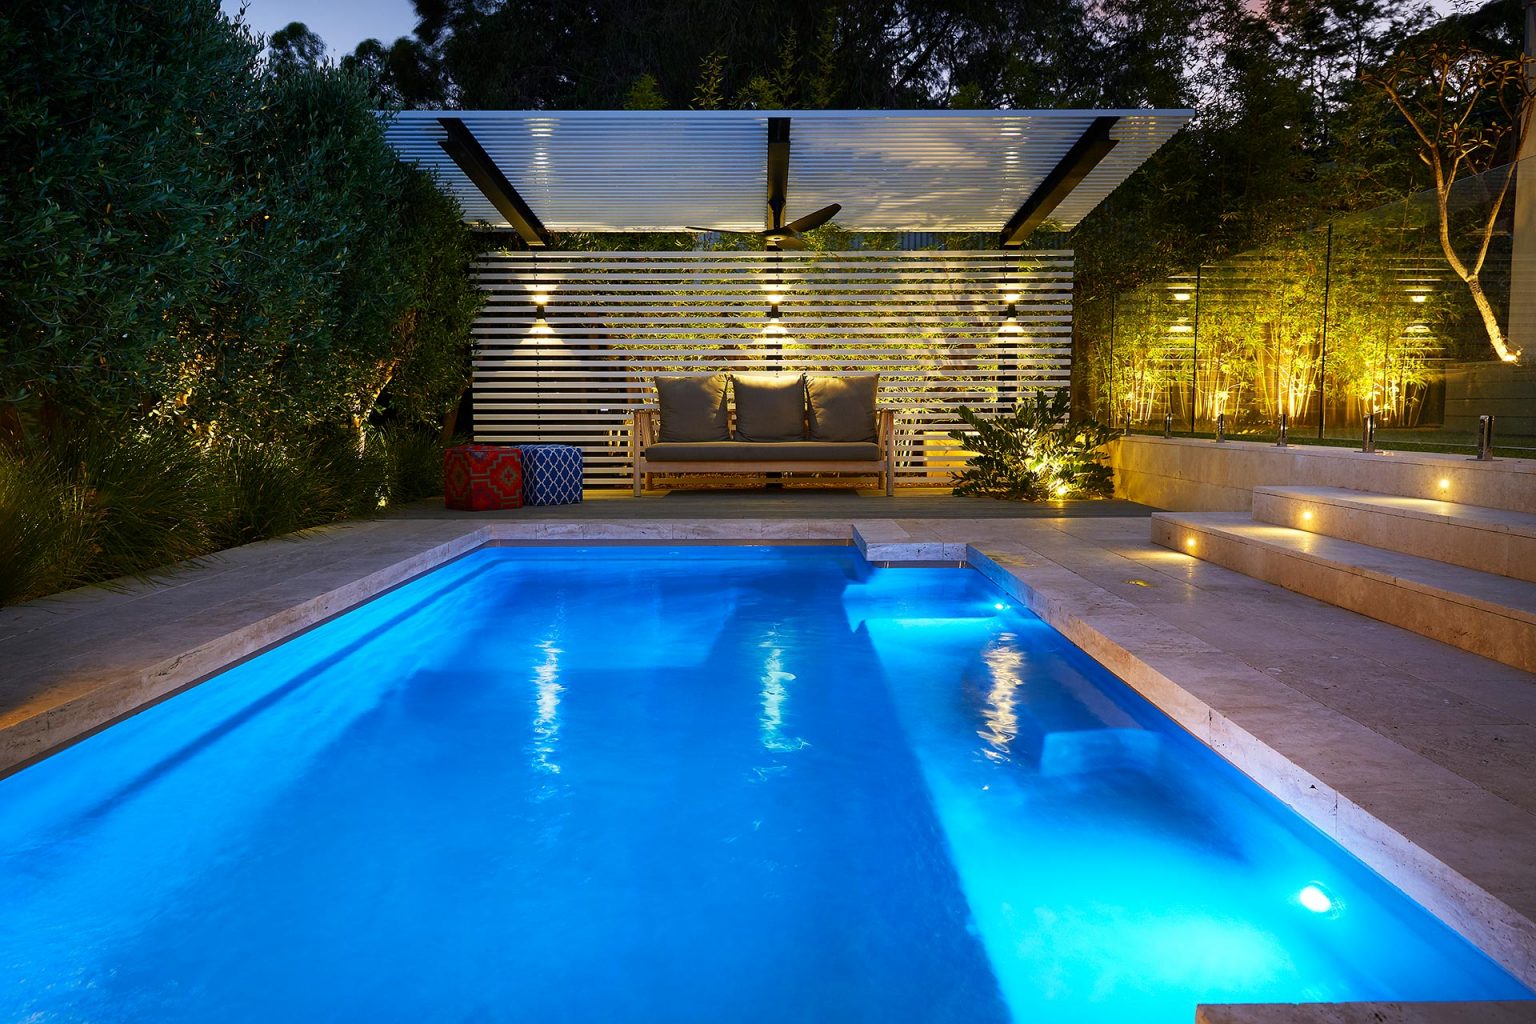 The Best & Most Popular Ways To Light Up Your Pool! - Barrier Reef Pools